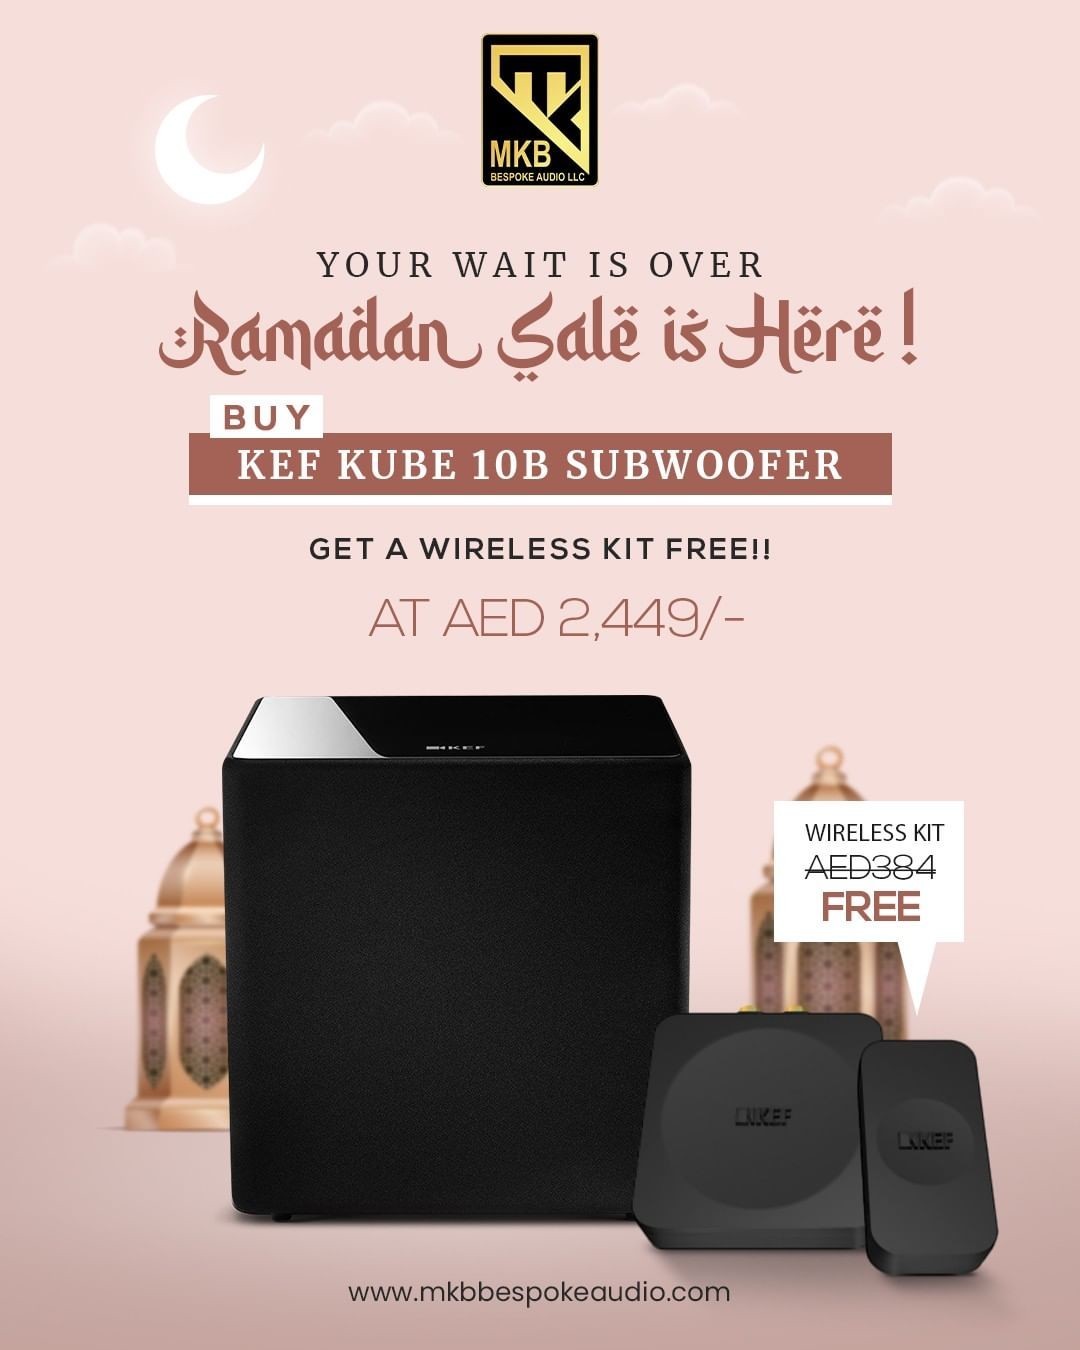 Buy KEF KUBE 10b SUBWOOFER and get a WIRELESS KIT FREE at AED 2,449